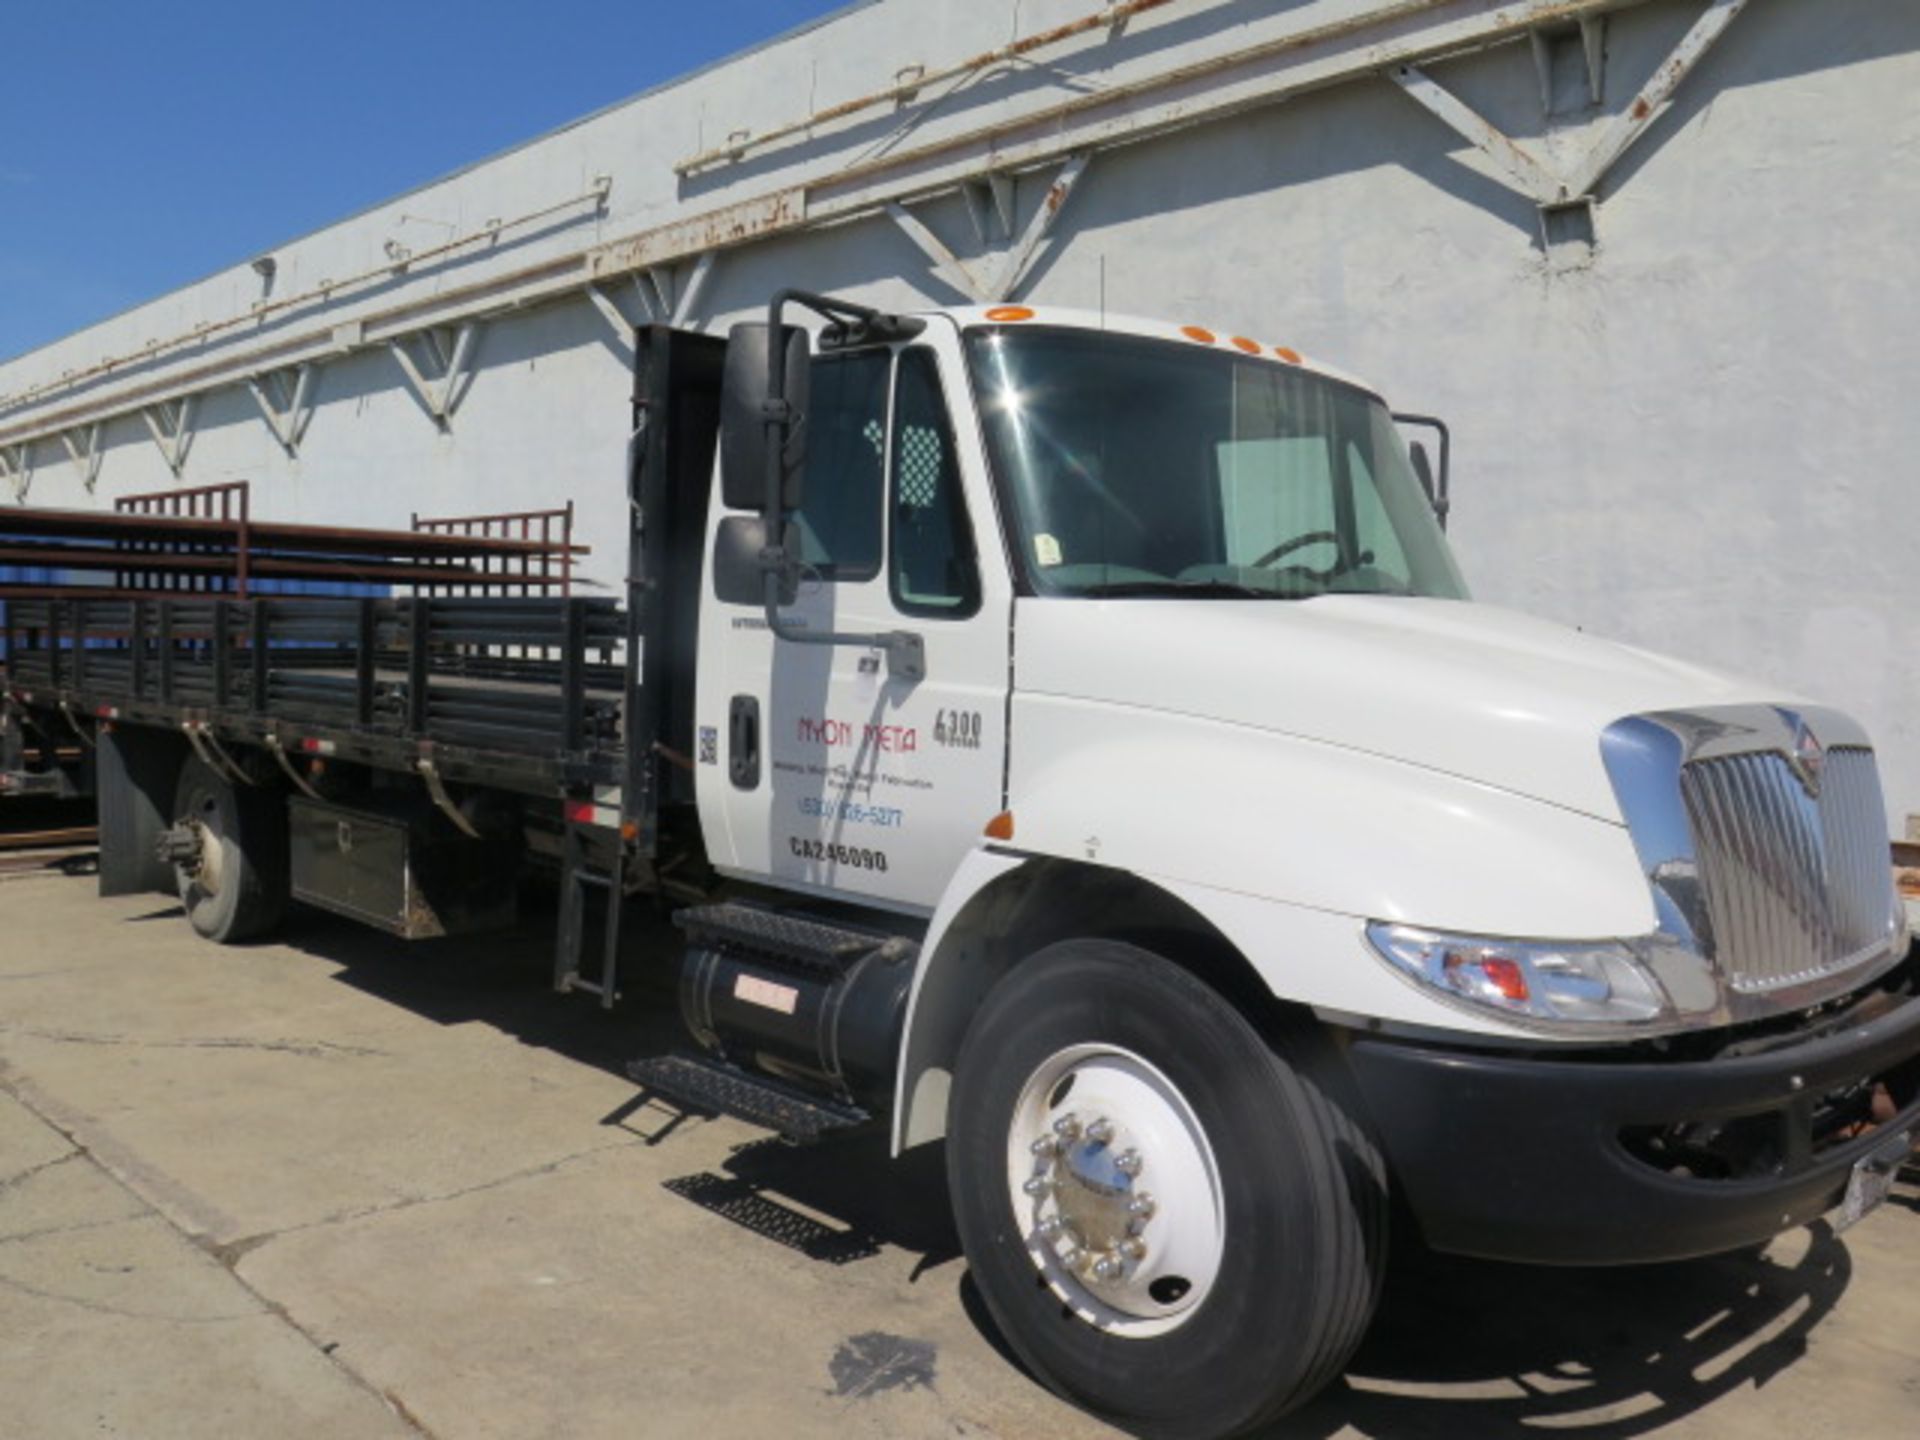 2005 International 4300 DT466 24’ Stake Bed Lisc# 19920K1 w/ Diesel, Auto,NOT FOR CA USE, SOLD AS IS